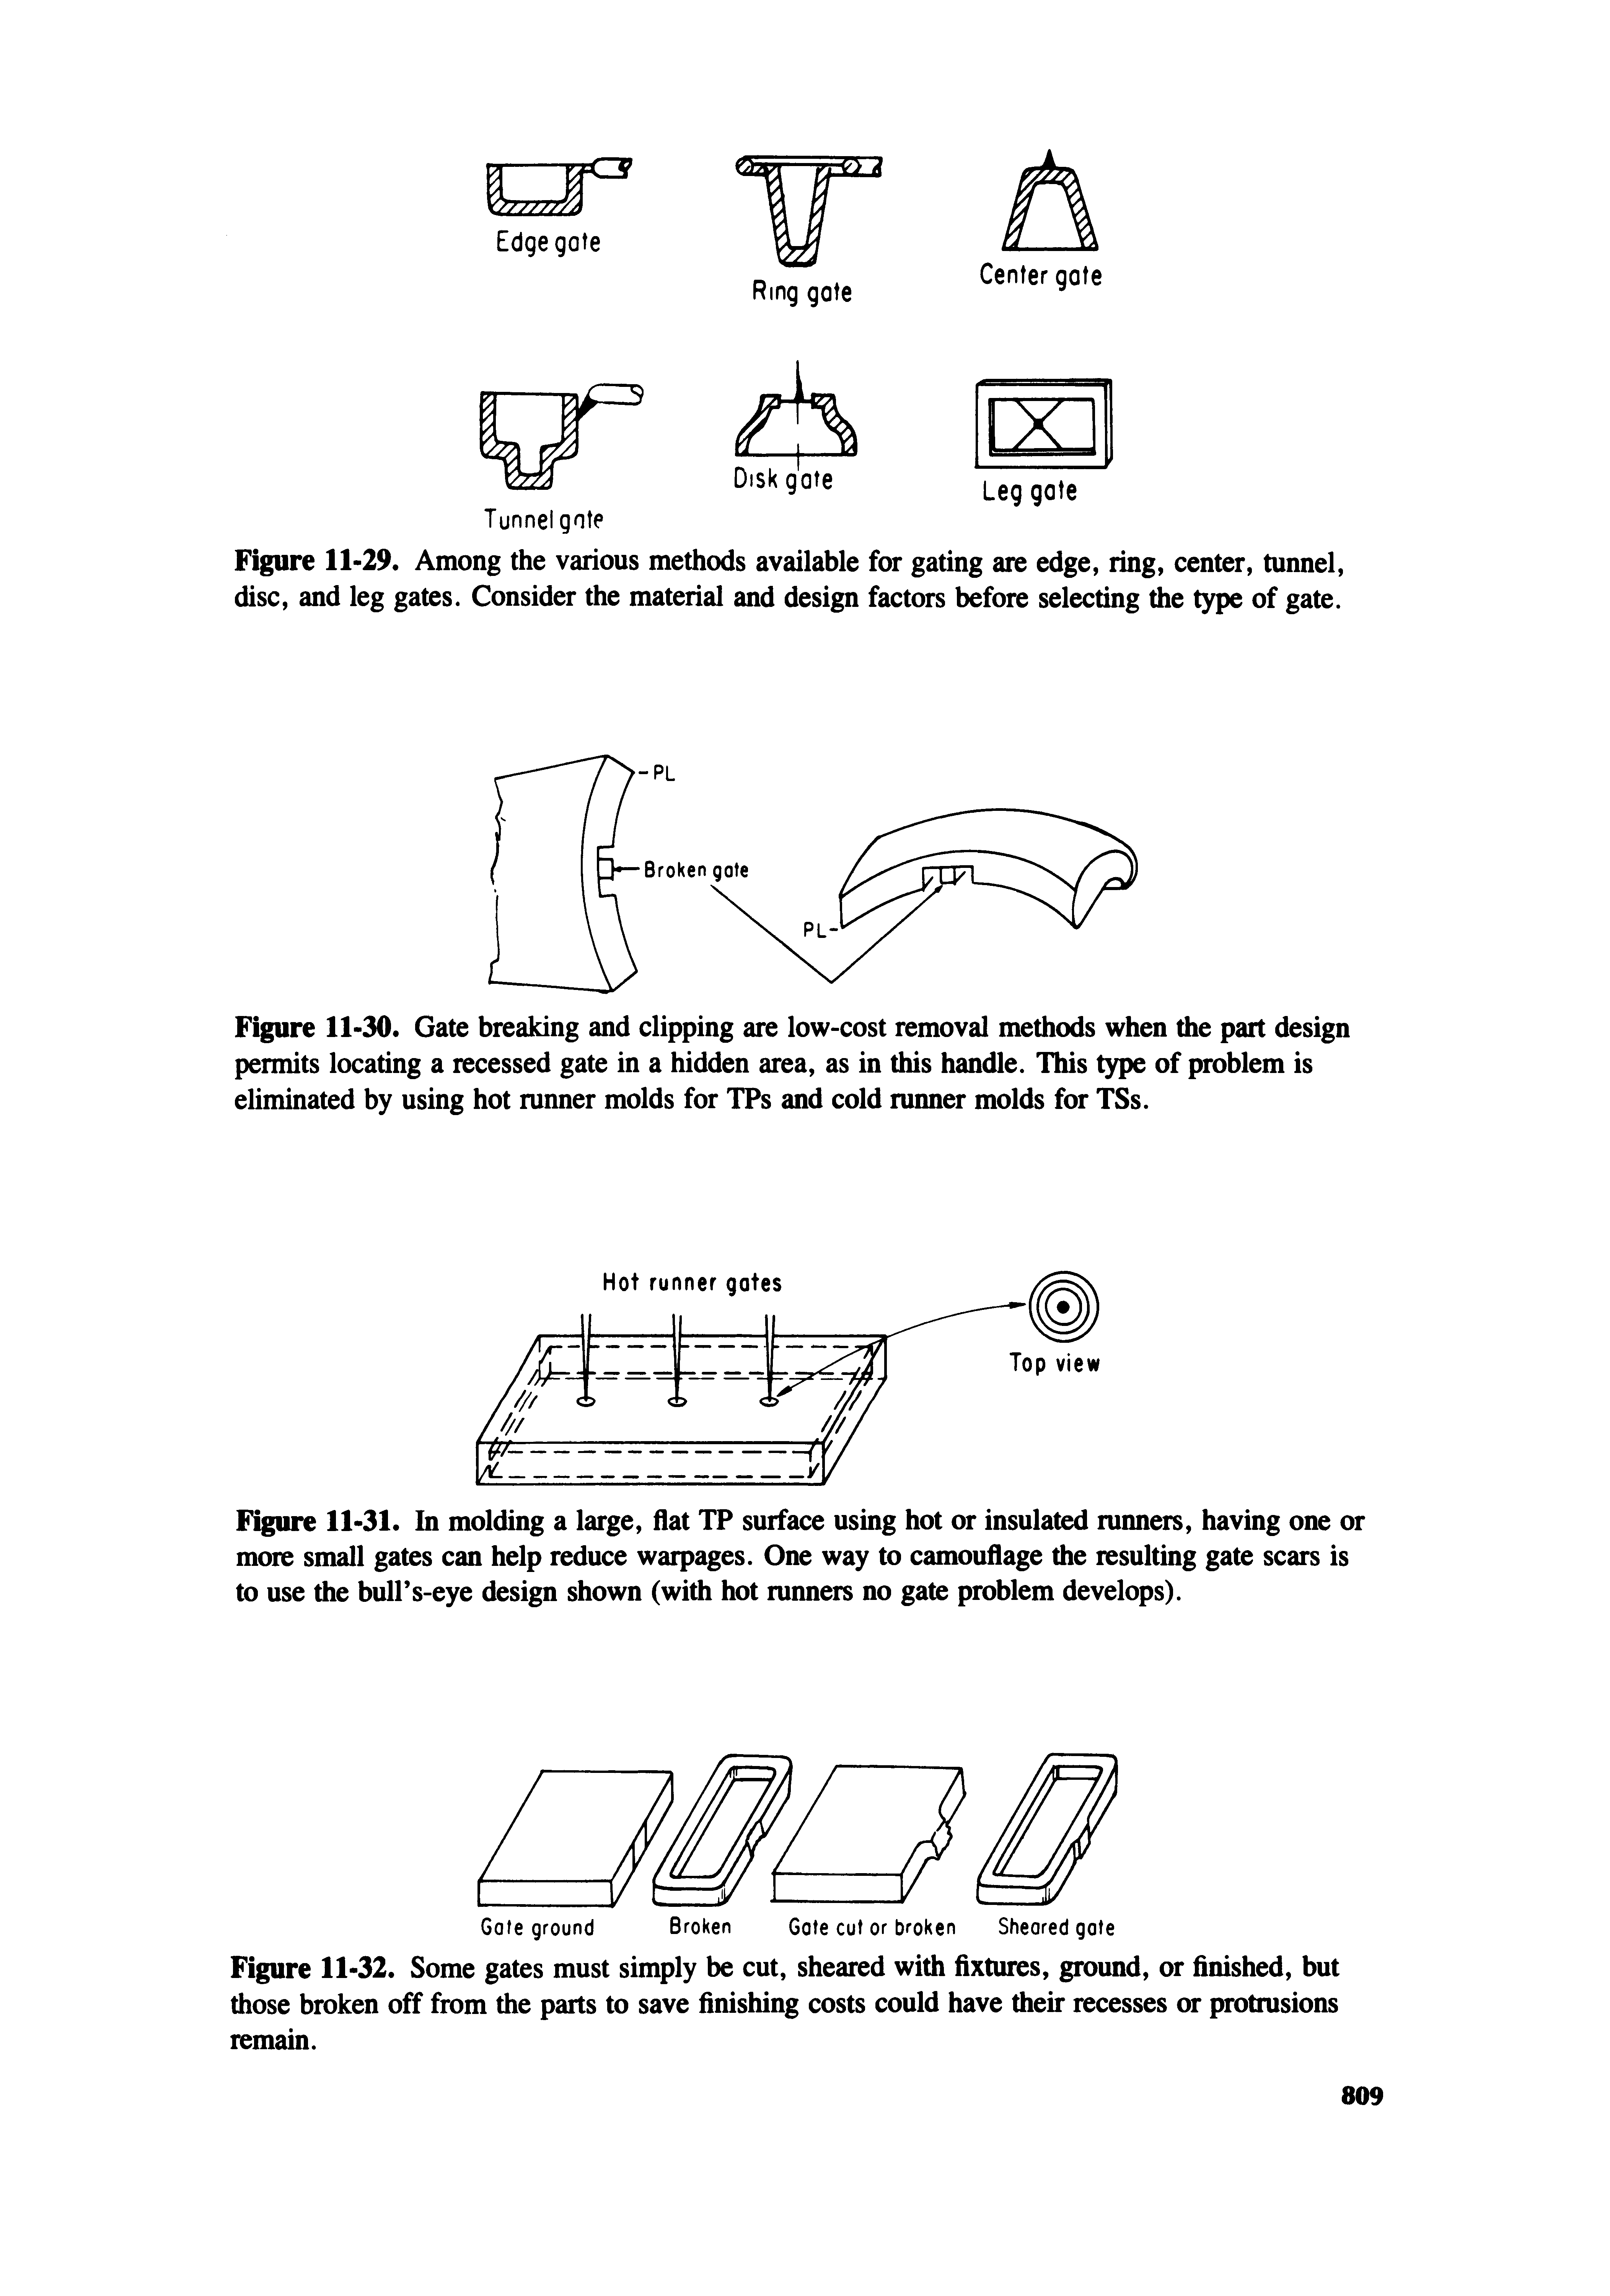 Figure 11-30. Gate breaking and clipping are low-cost removal methods when the part design permits locating a recessed gate in a hidden area, as in this handle. This type of problem is eliminated by using hot runner molds for TPs and cold runner molds for TSs.